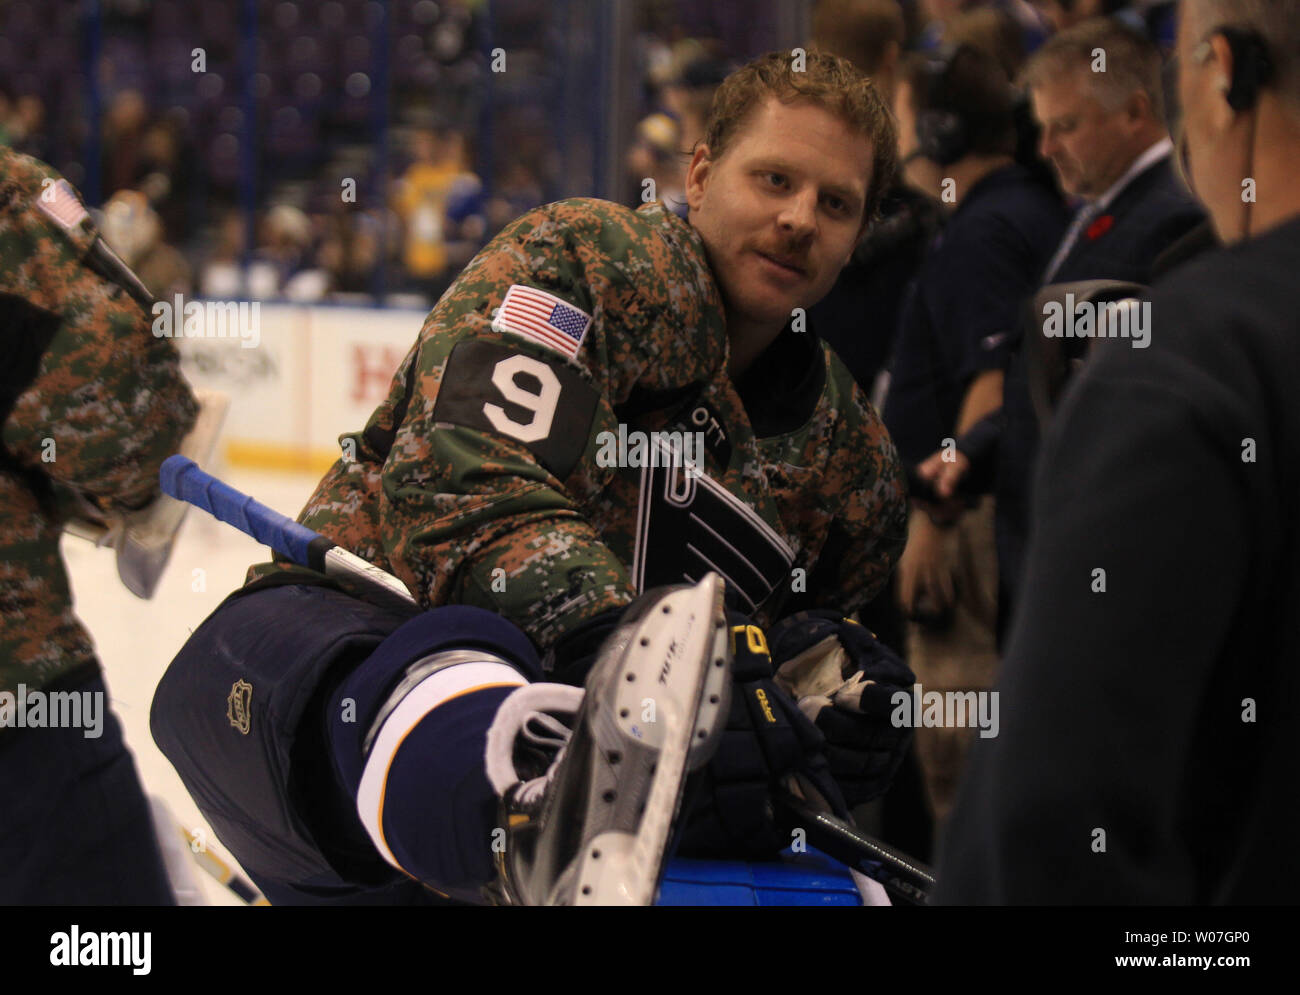 St. Louis Blues Steve Ott stretches wearing a camouflage jersey during a  pre game skate before a game against the Buffalo Sabres at the Scottrade  Center in St. Louis on November 11,